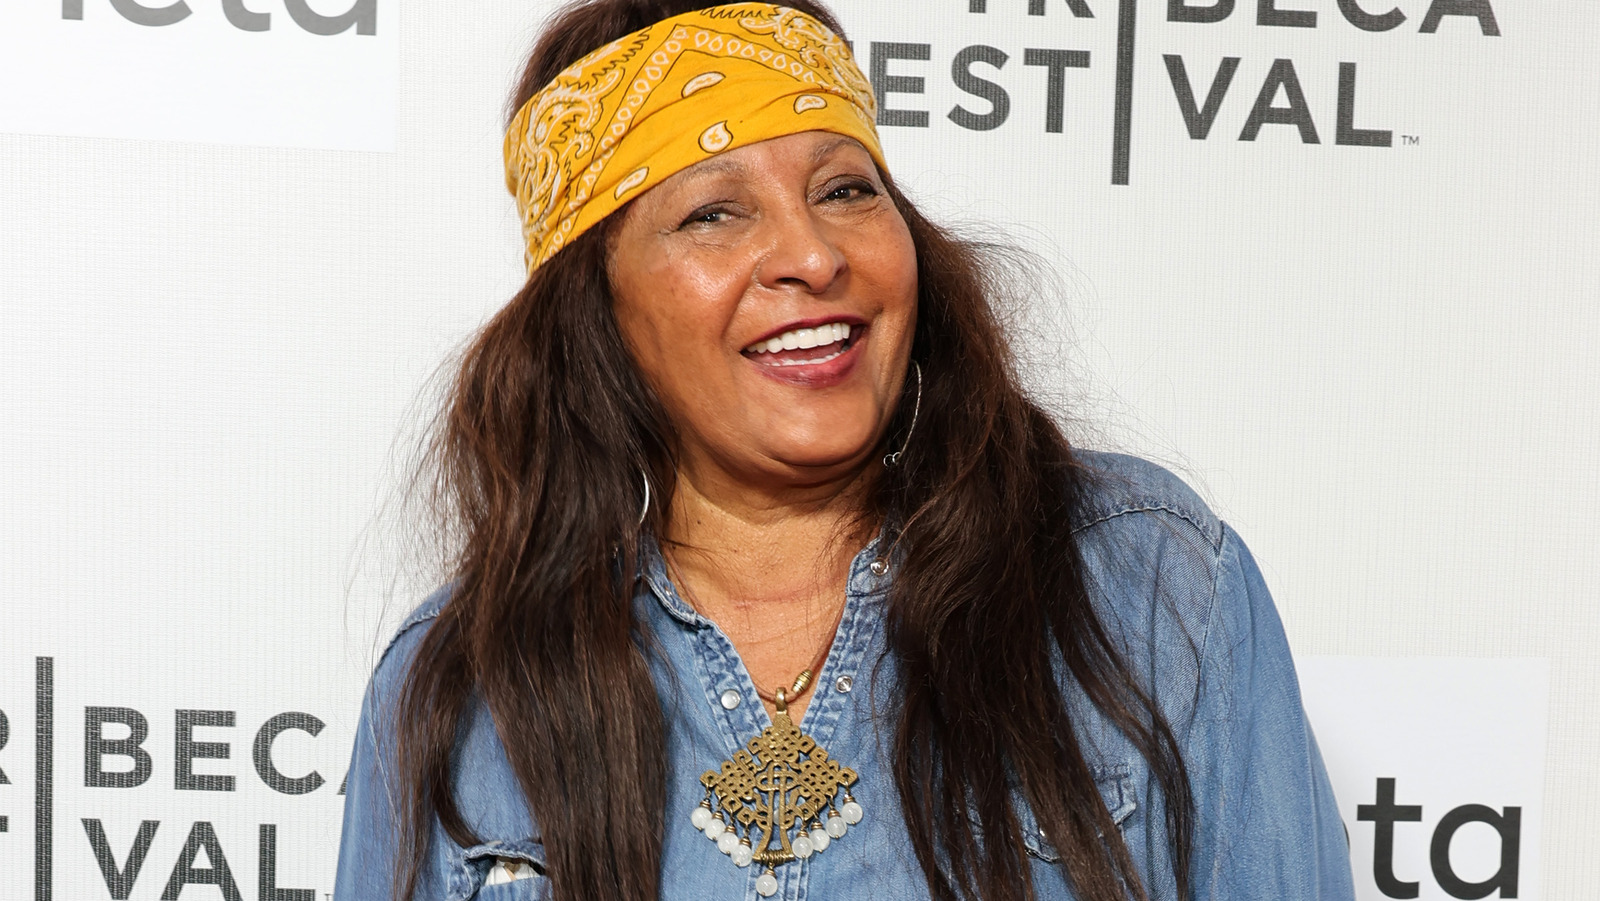 Why Pam Grier refused to play 'Octopussy' Bond girl role